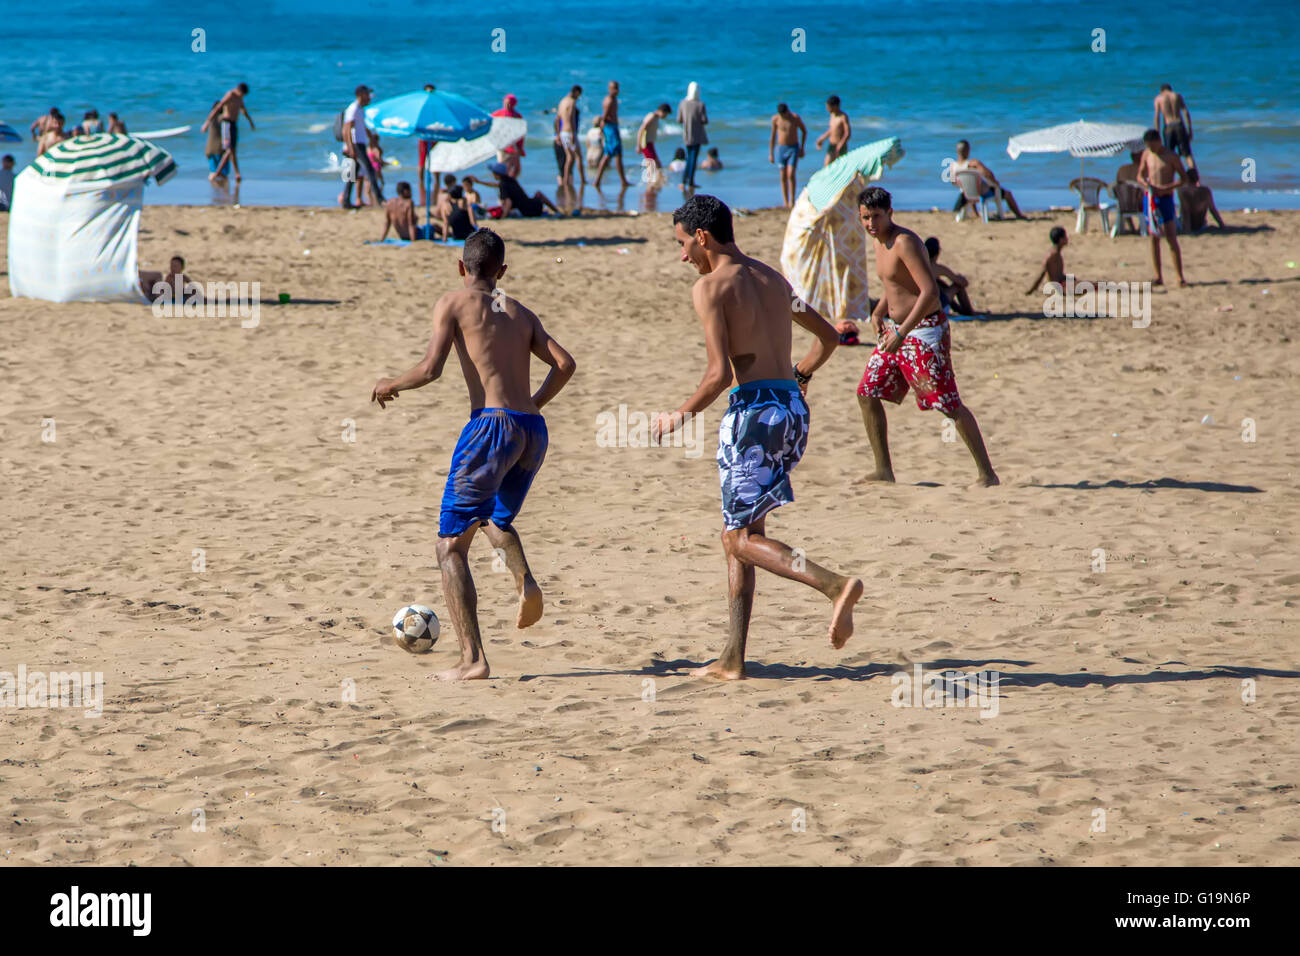 Unidentified people playing soccer at the beach. Soccer is a very popular sport in Morocco. Stock Photo